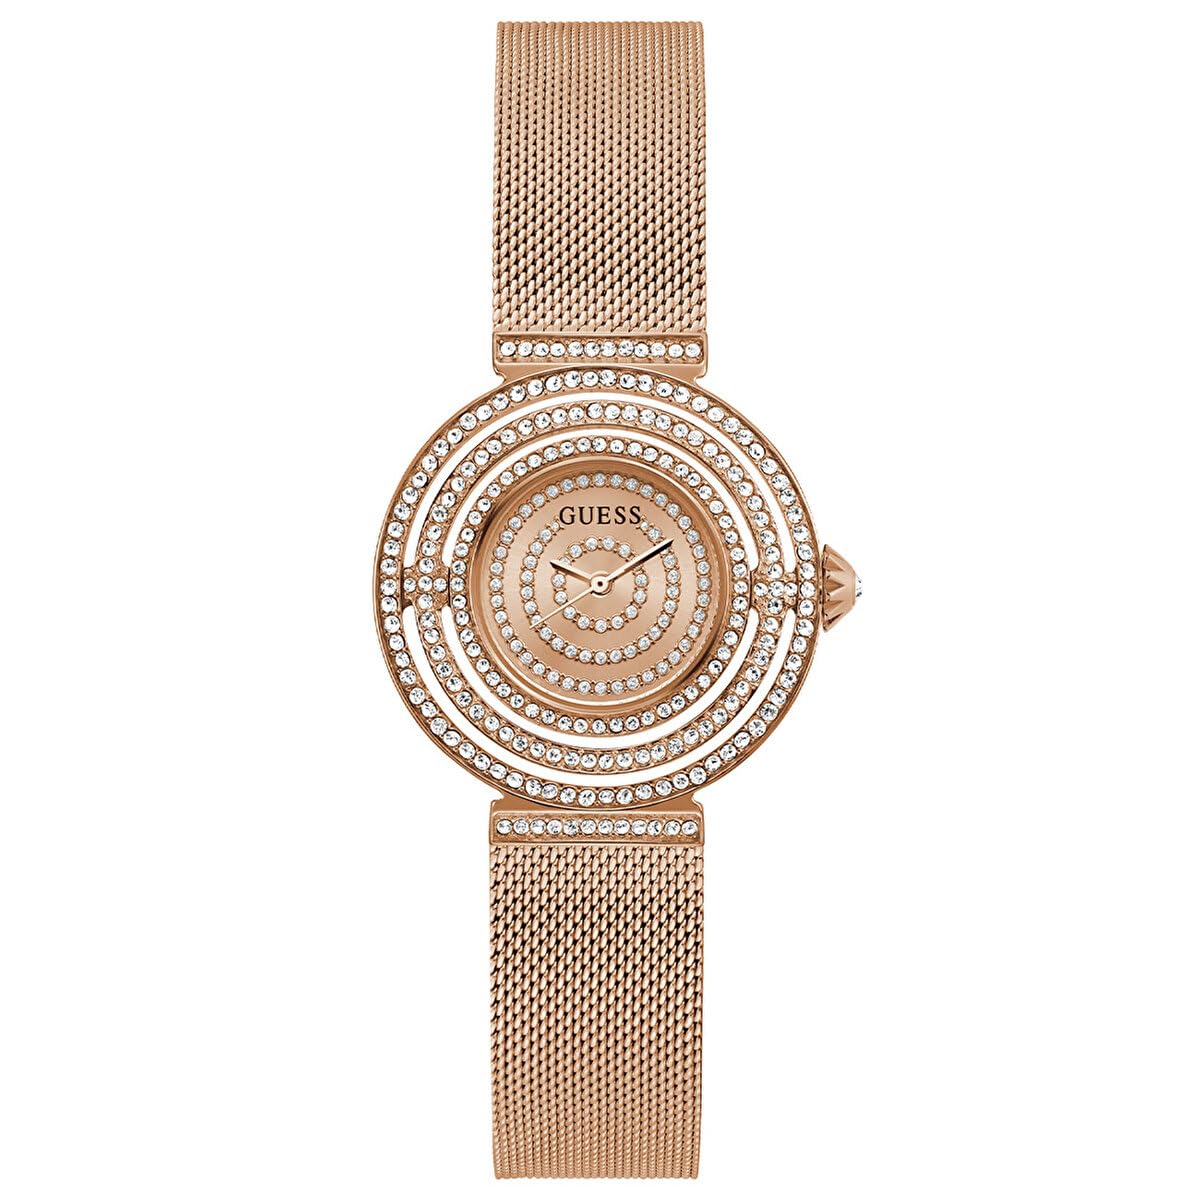 GUESS Rose Gold-Tone and Crystal Analog Watch